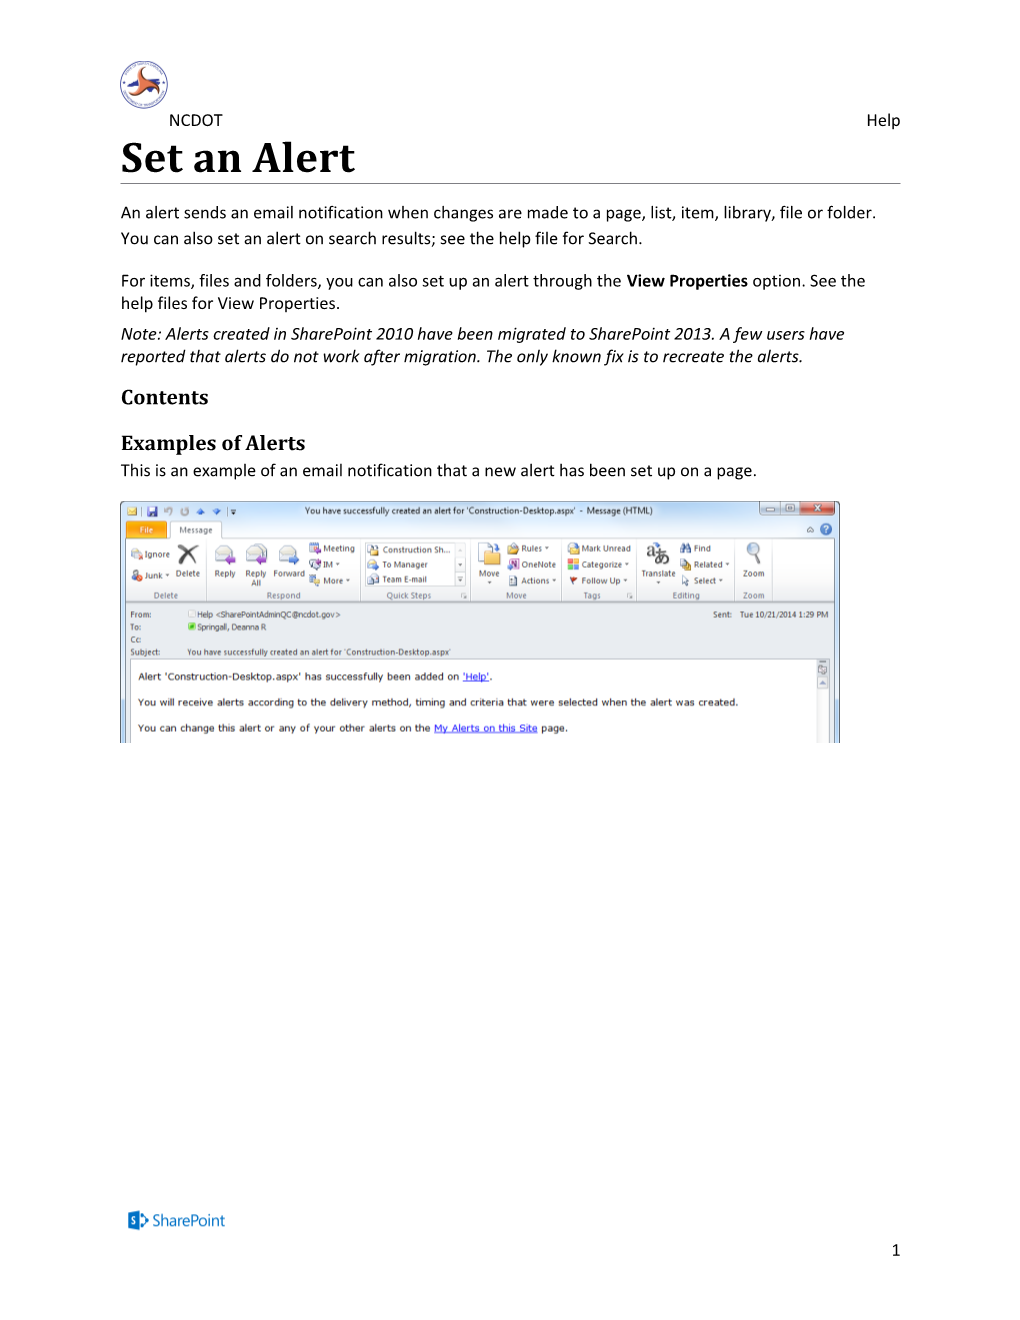 An Alert Sends an Email Notification Whenchanges Are Made to a Page, List, Item, Library